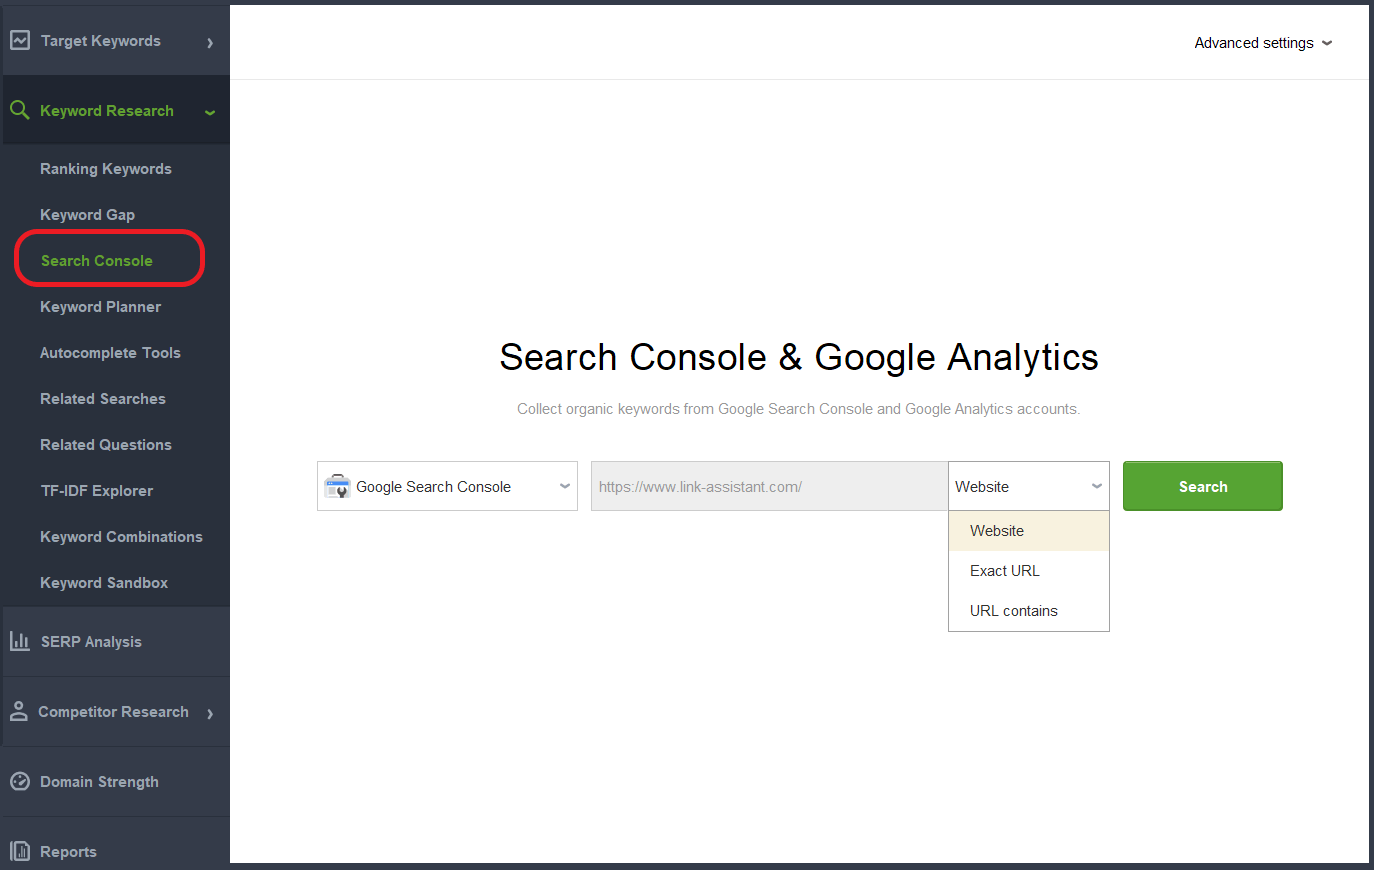 Let the Rank Tracker extract all ranking keywords from Search Console